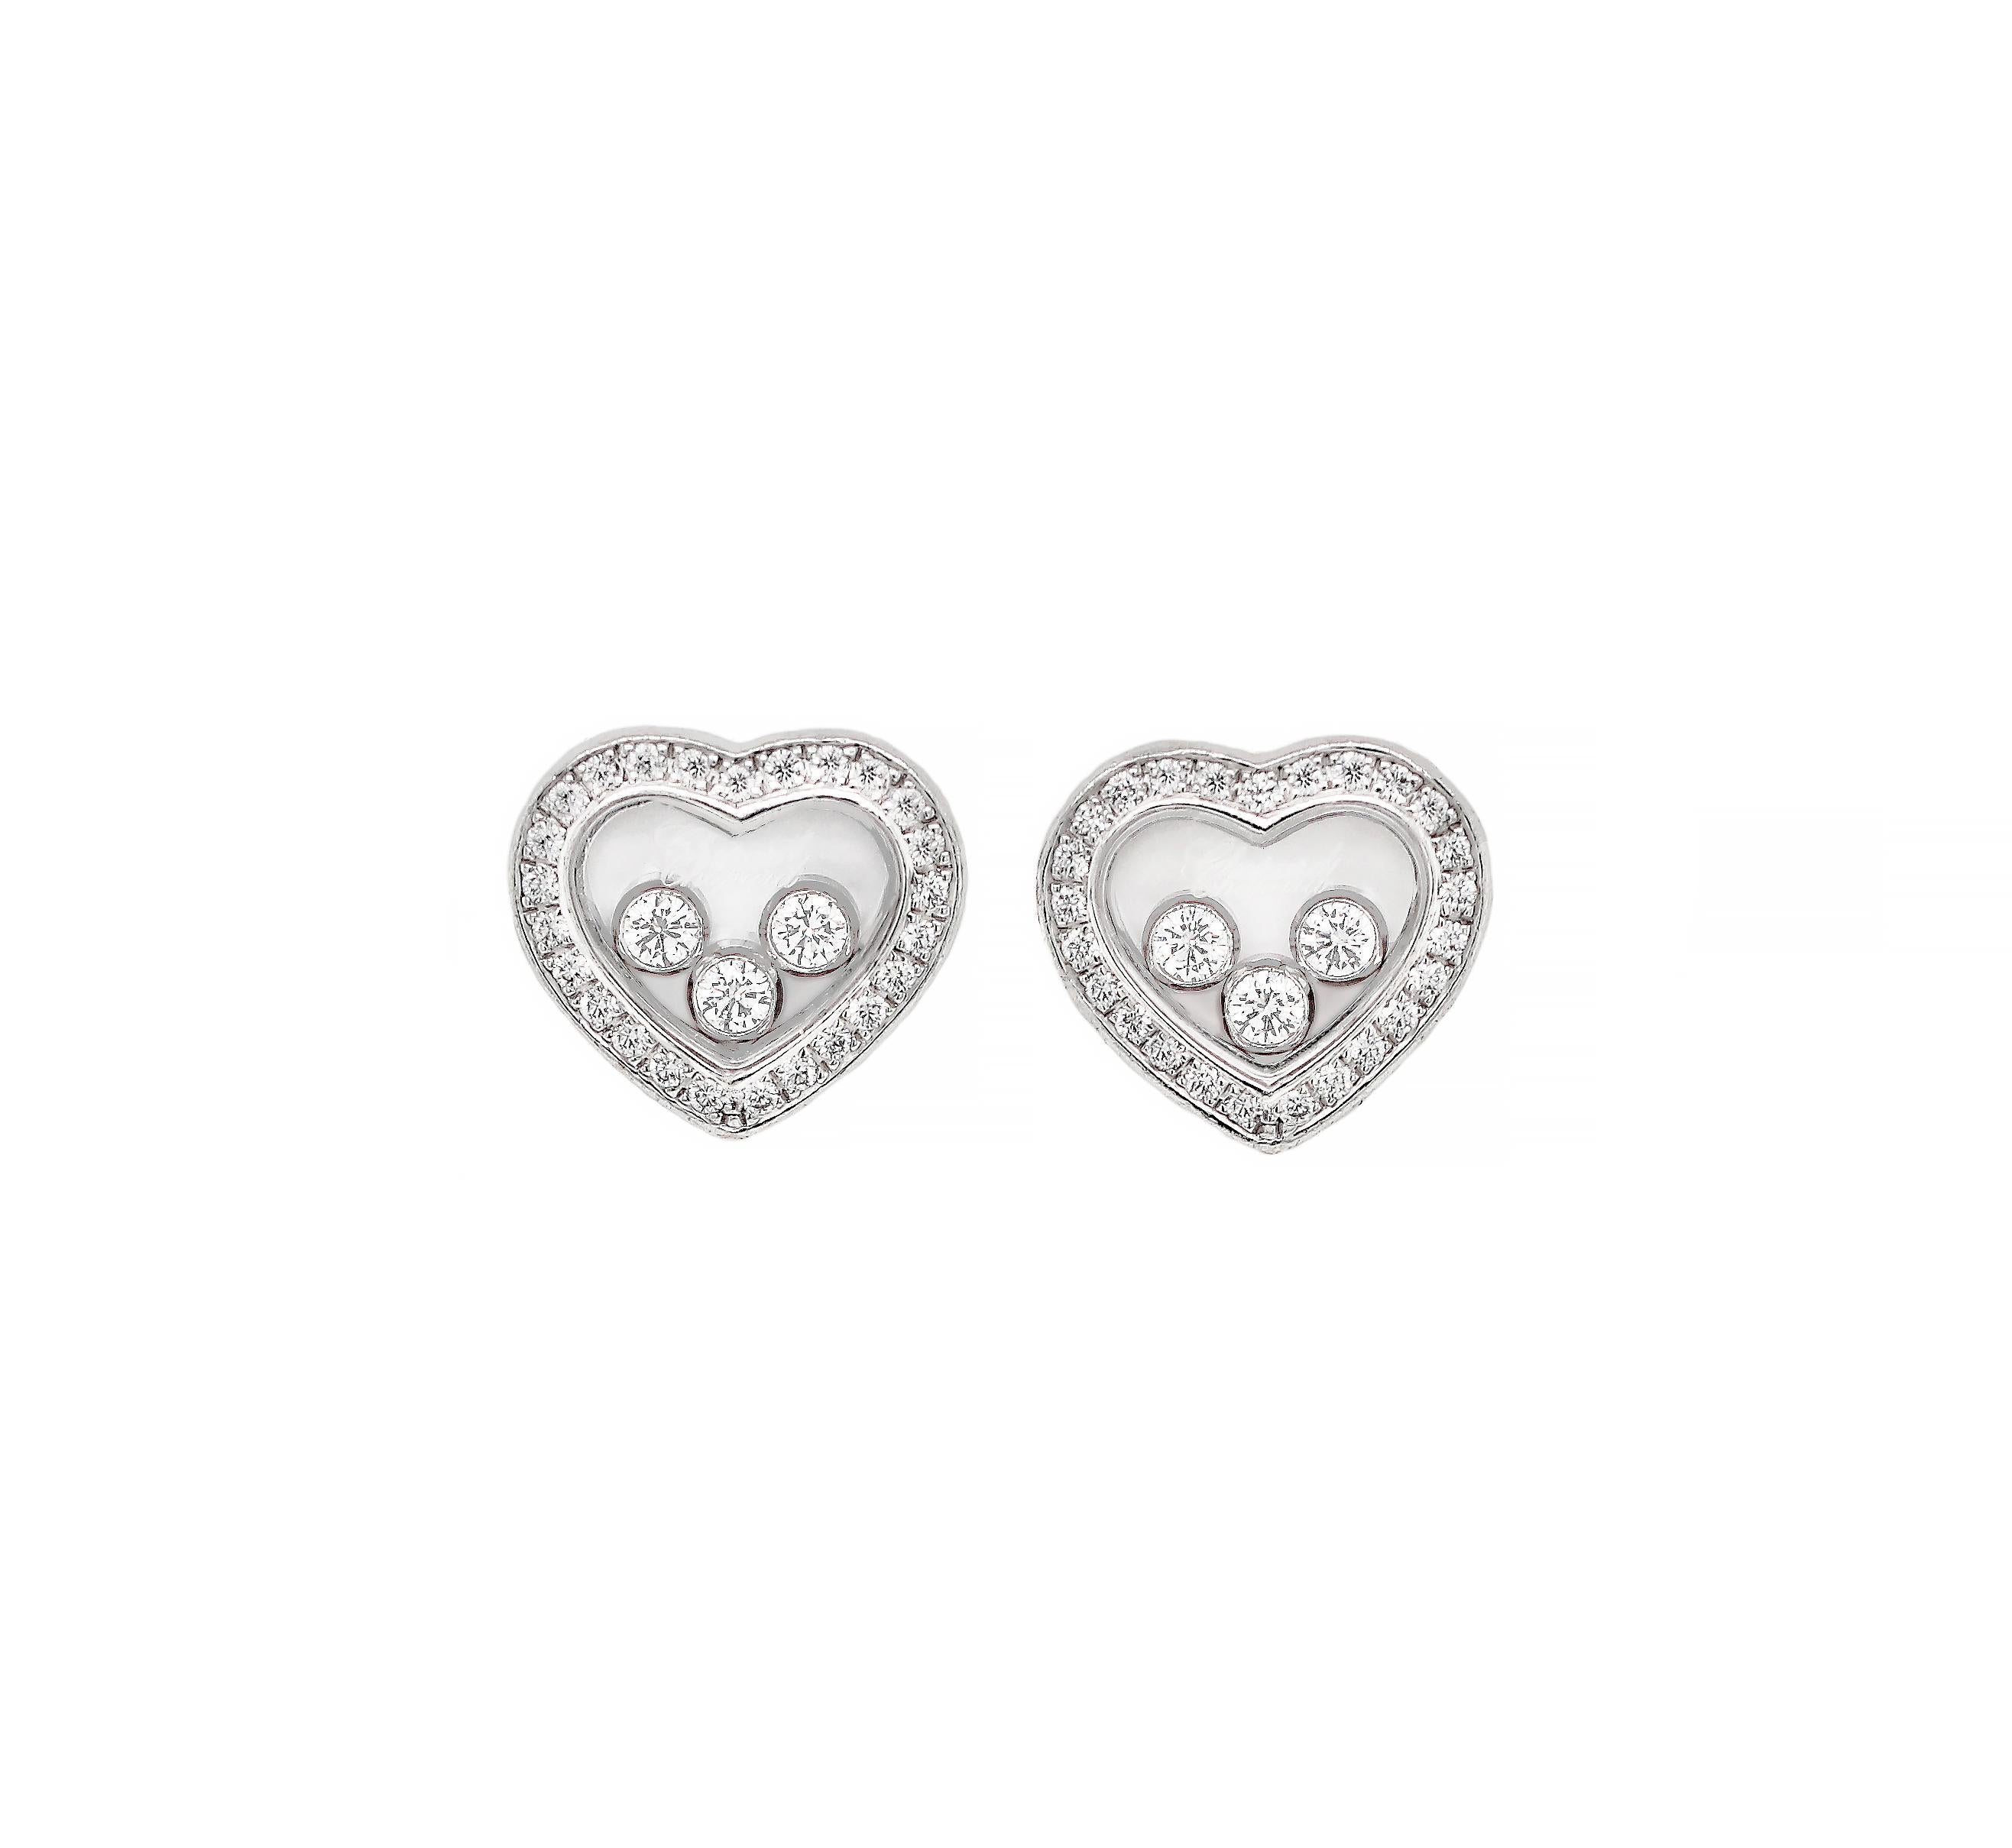 Beautiful heart shaped earrings from Chopard's signature Happy Diamond collection each pavé set with 25 round brilliant cut diamonds on each heart. The earrings then feature 3 freely-moving round brilliant cut diamonds encased between two sapphire